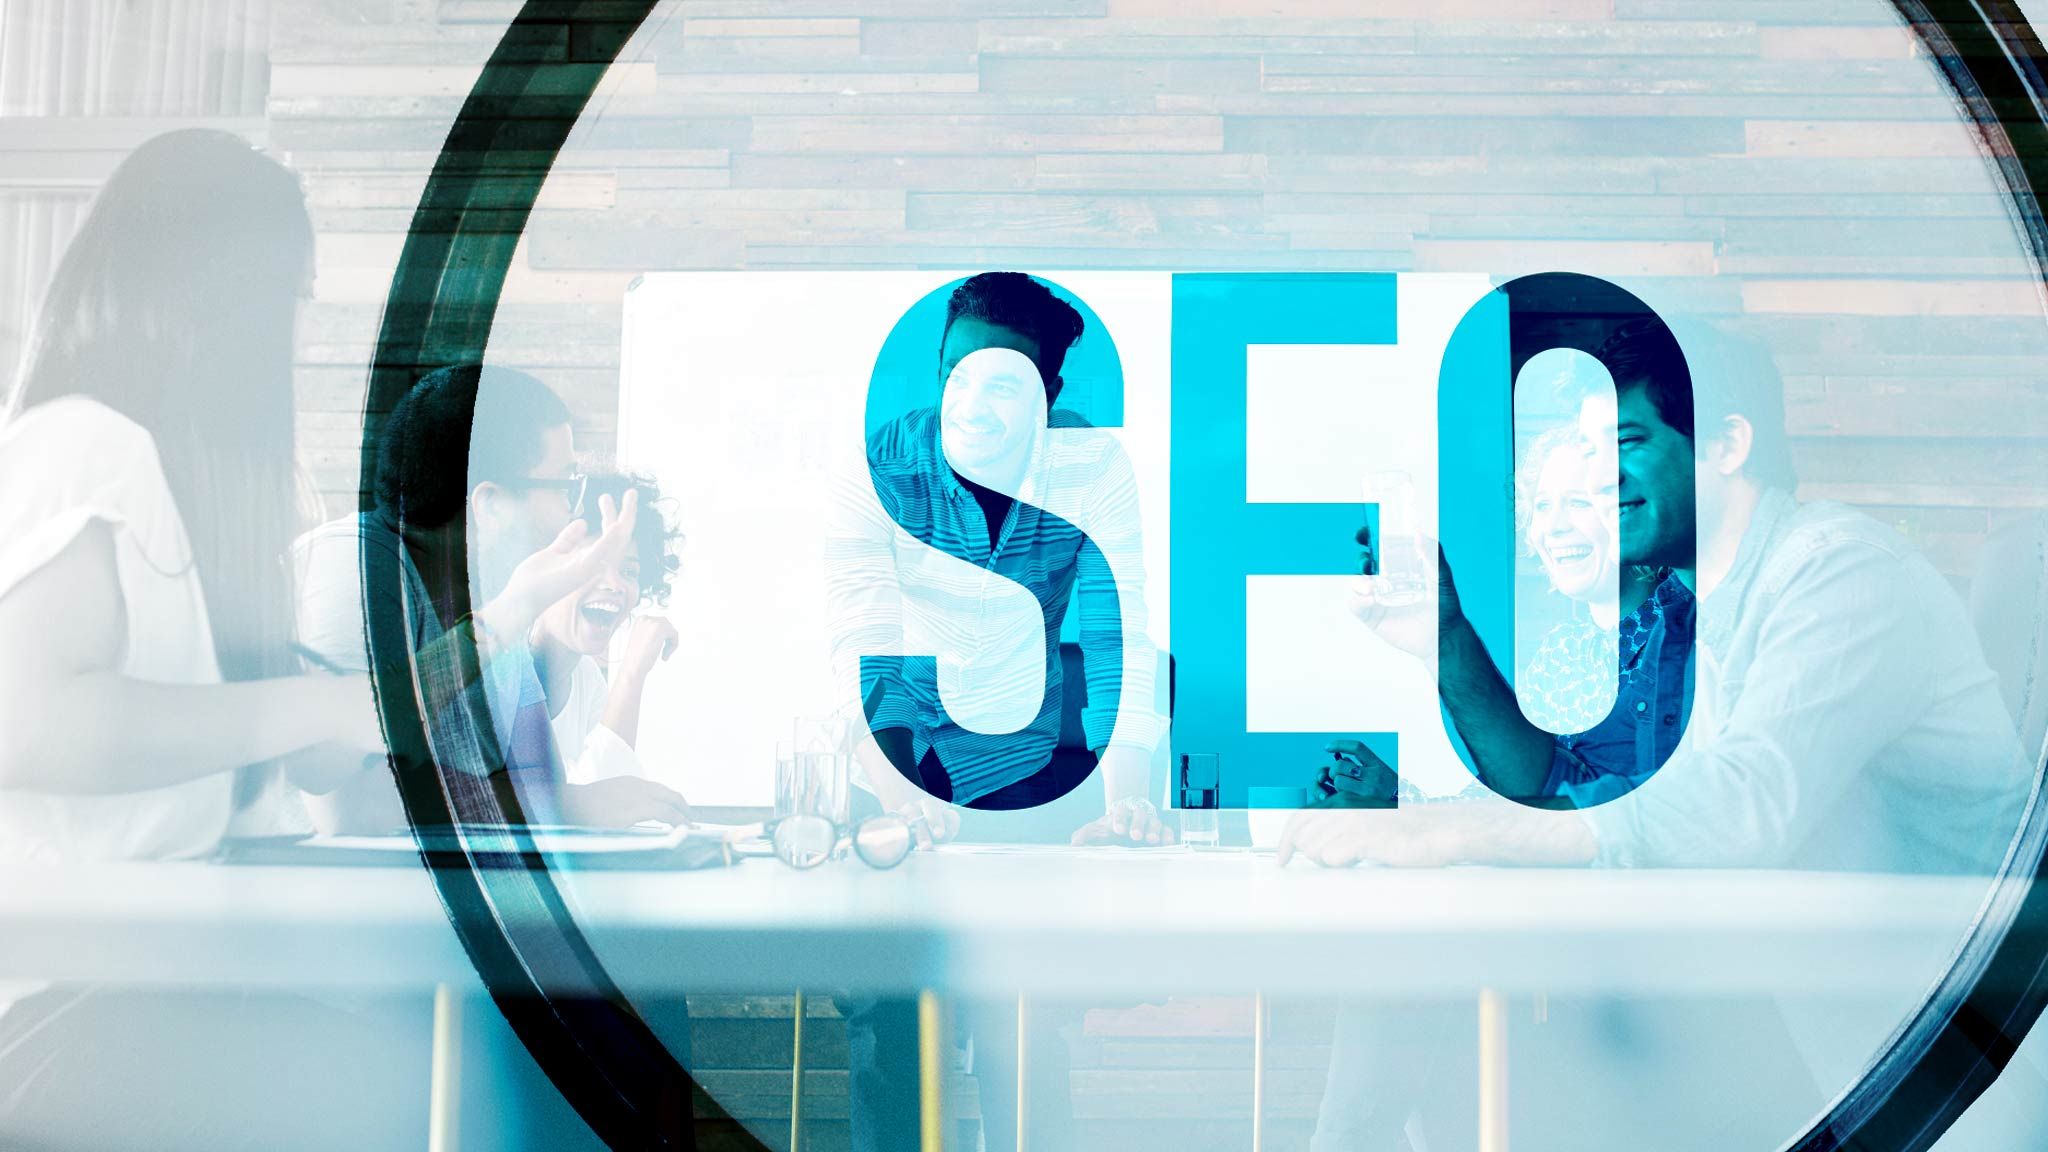 How to Find the Right SEO Agency for Your Business